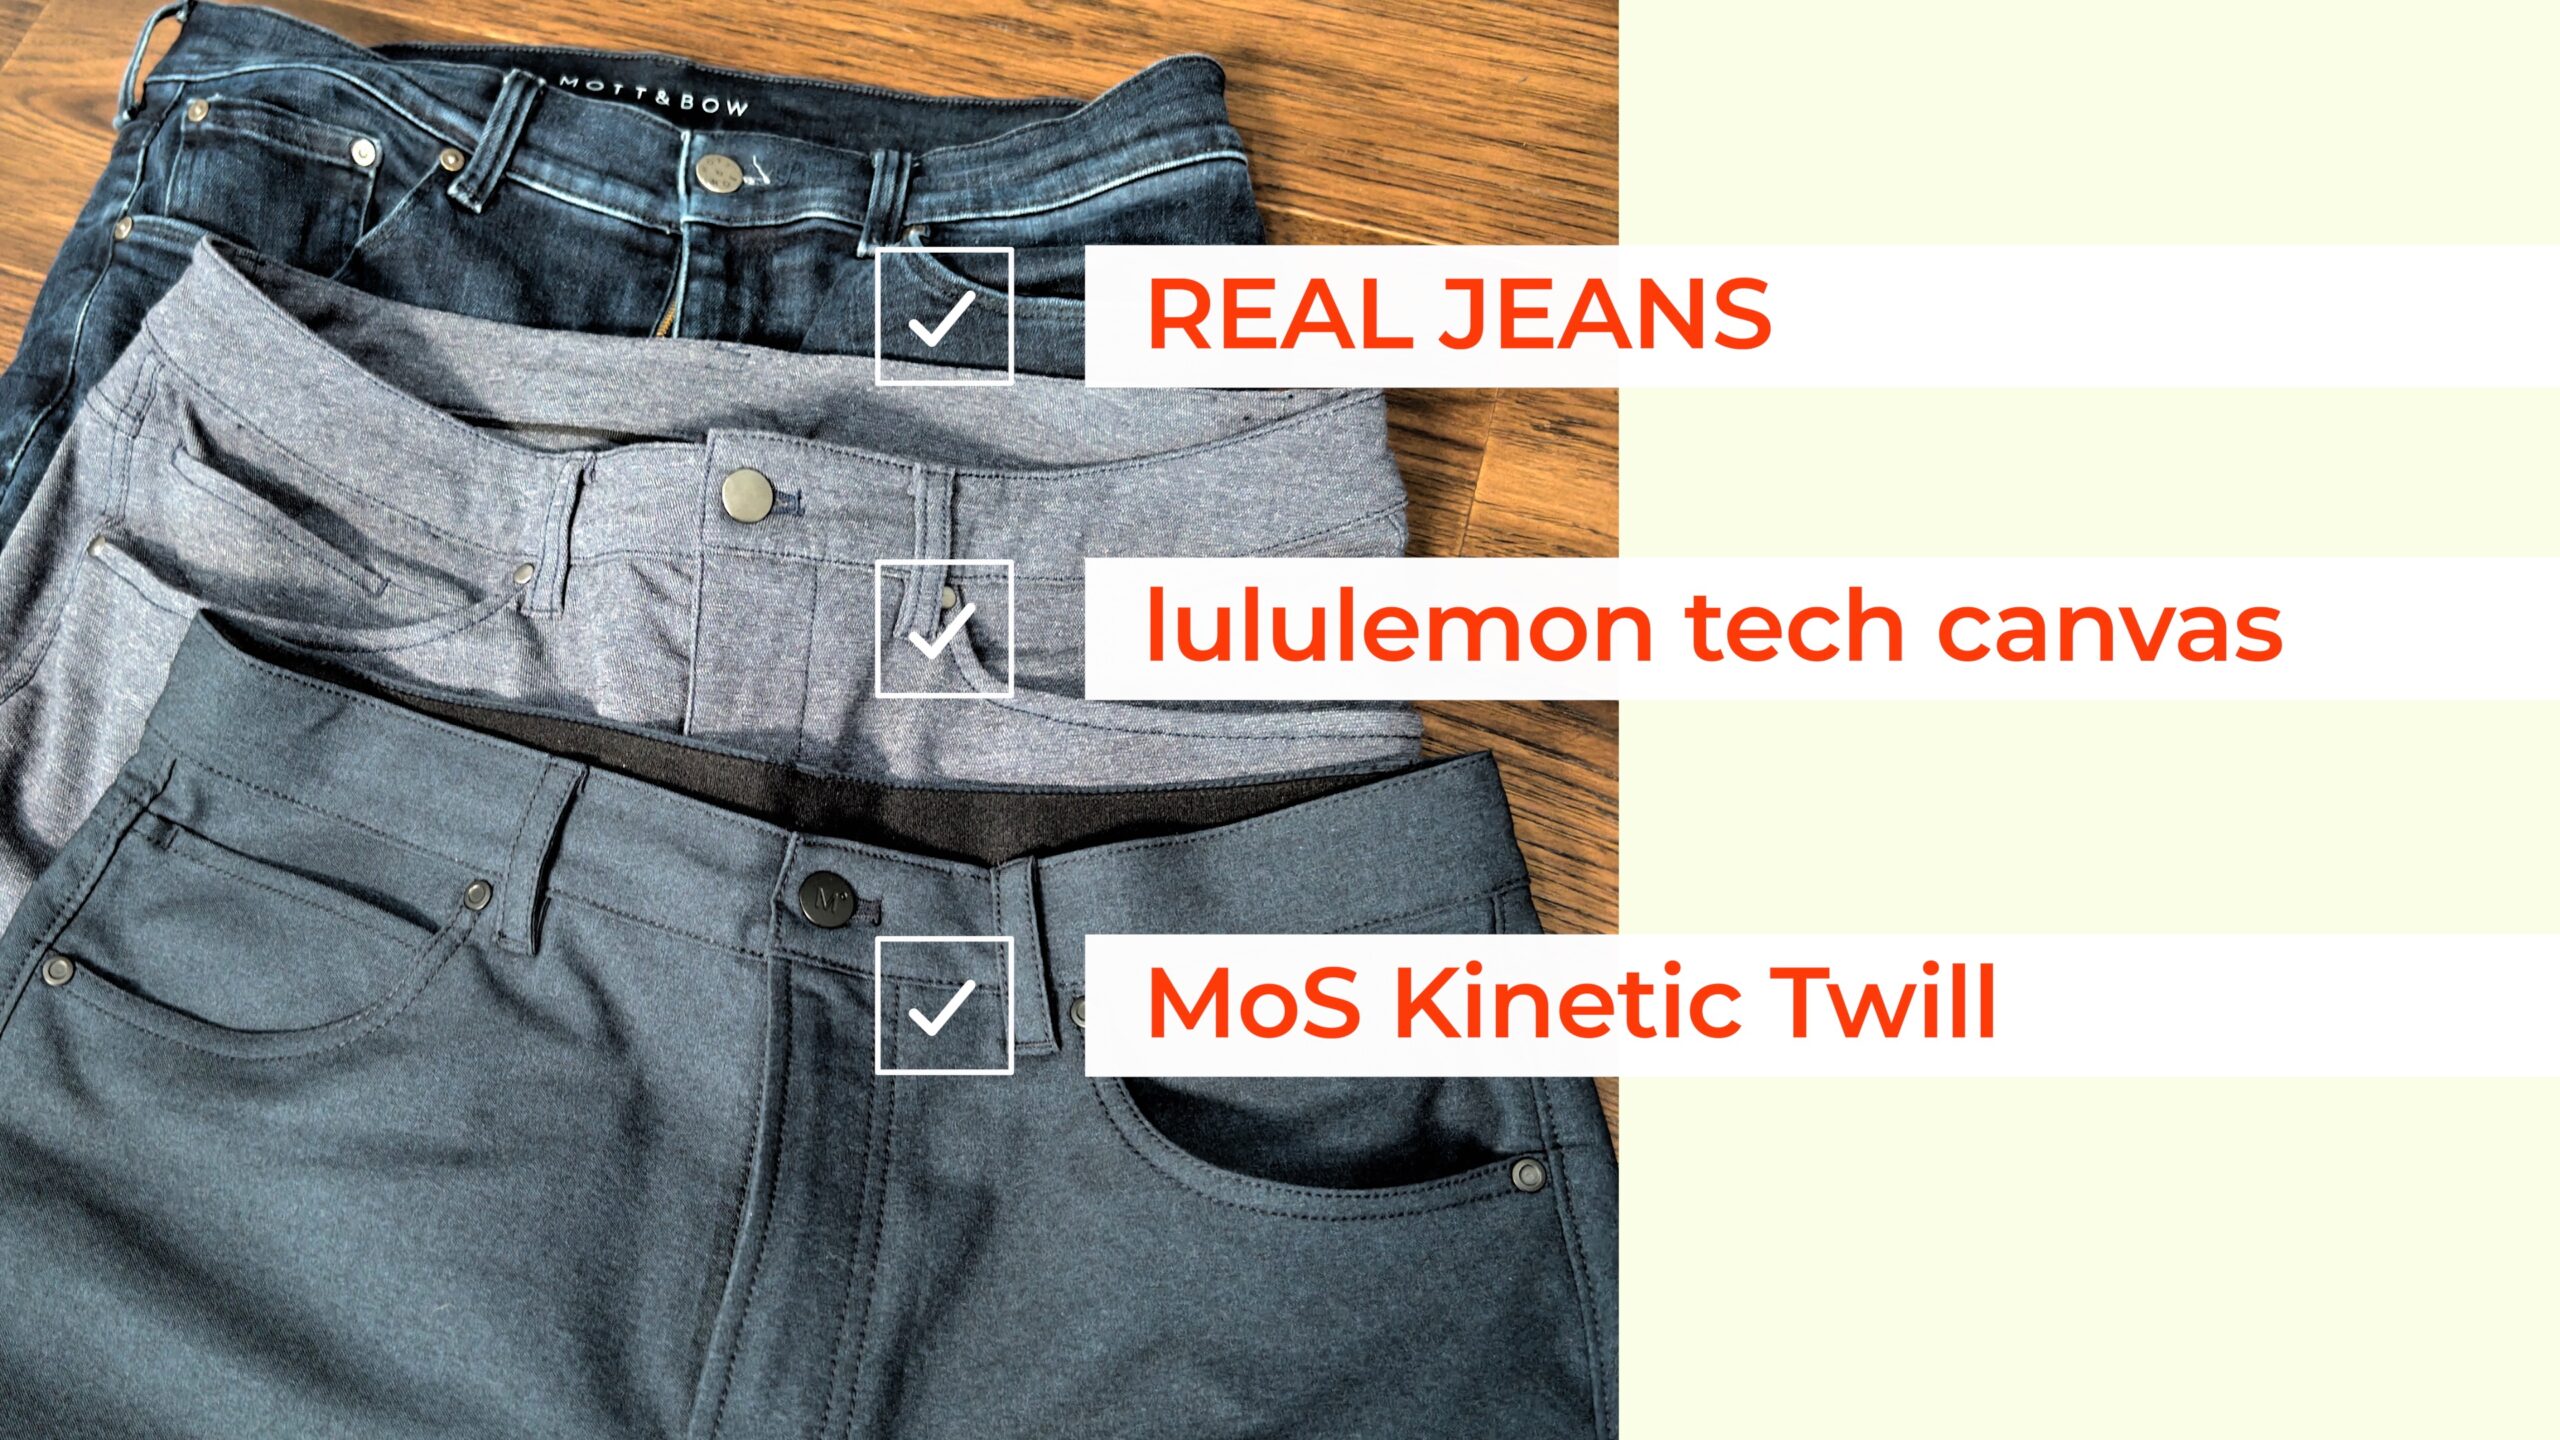 Ministry of Supply Kinetic Twill Pants Review